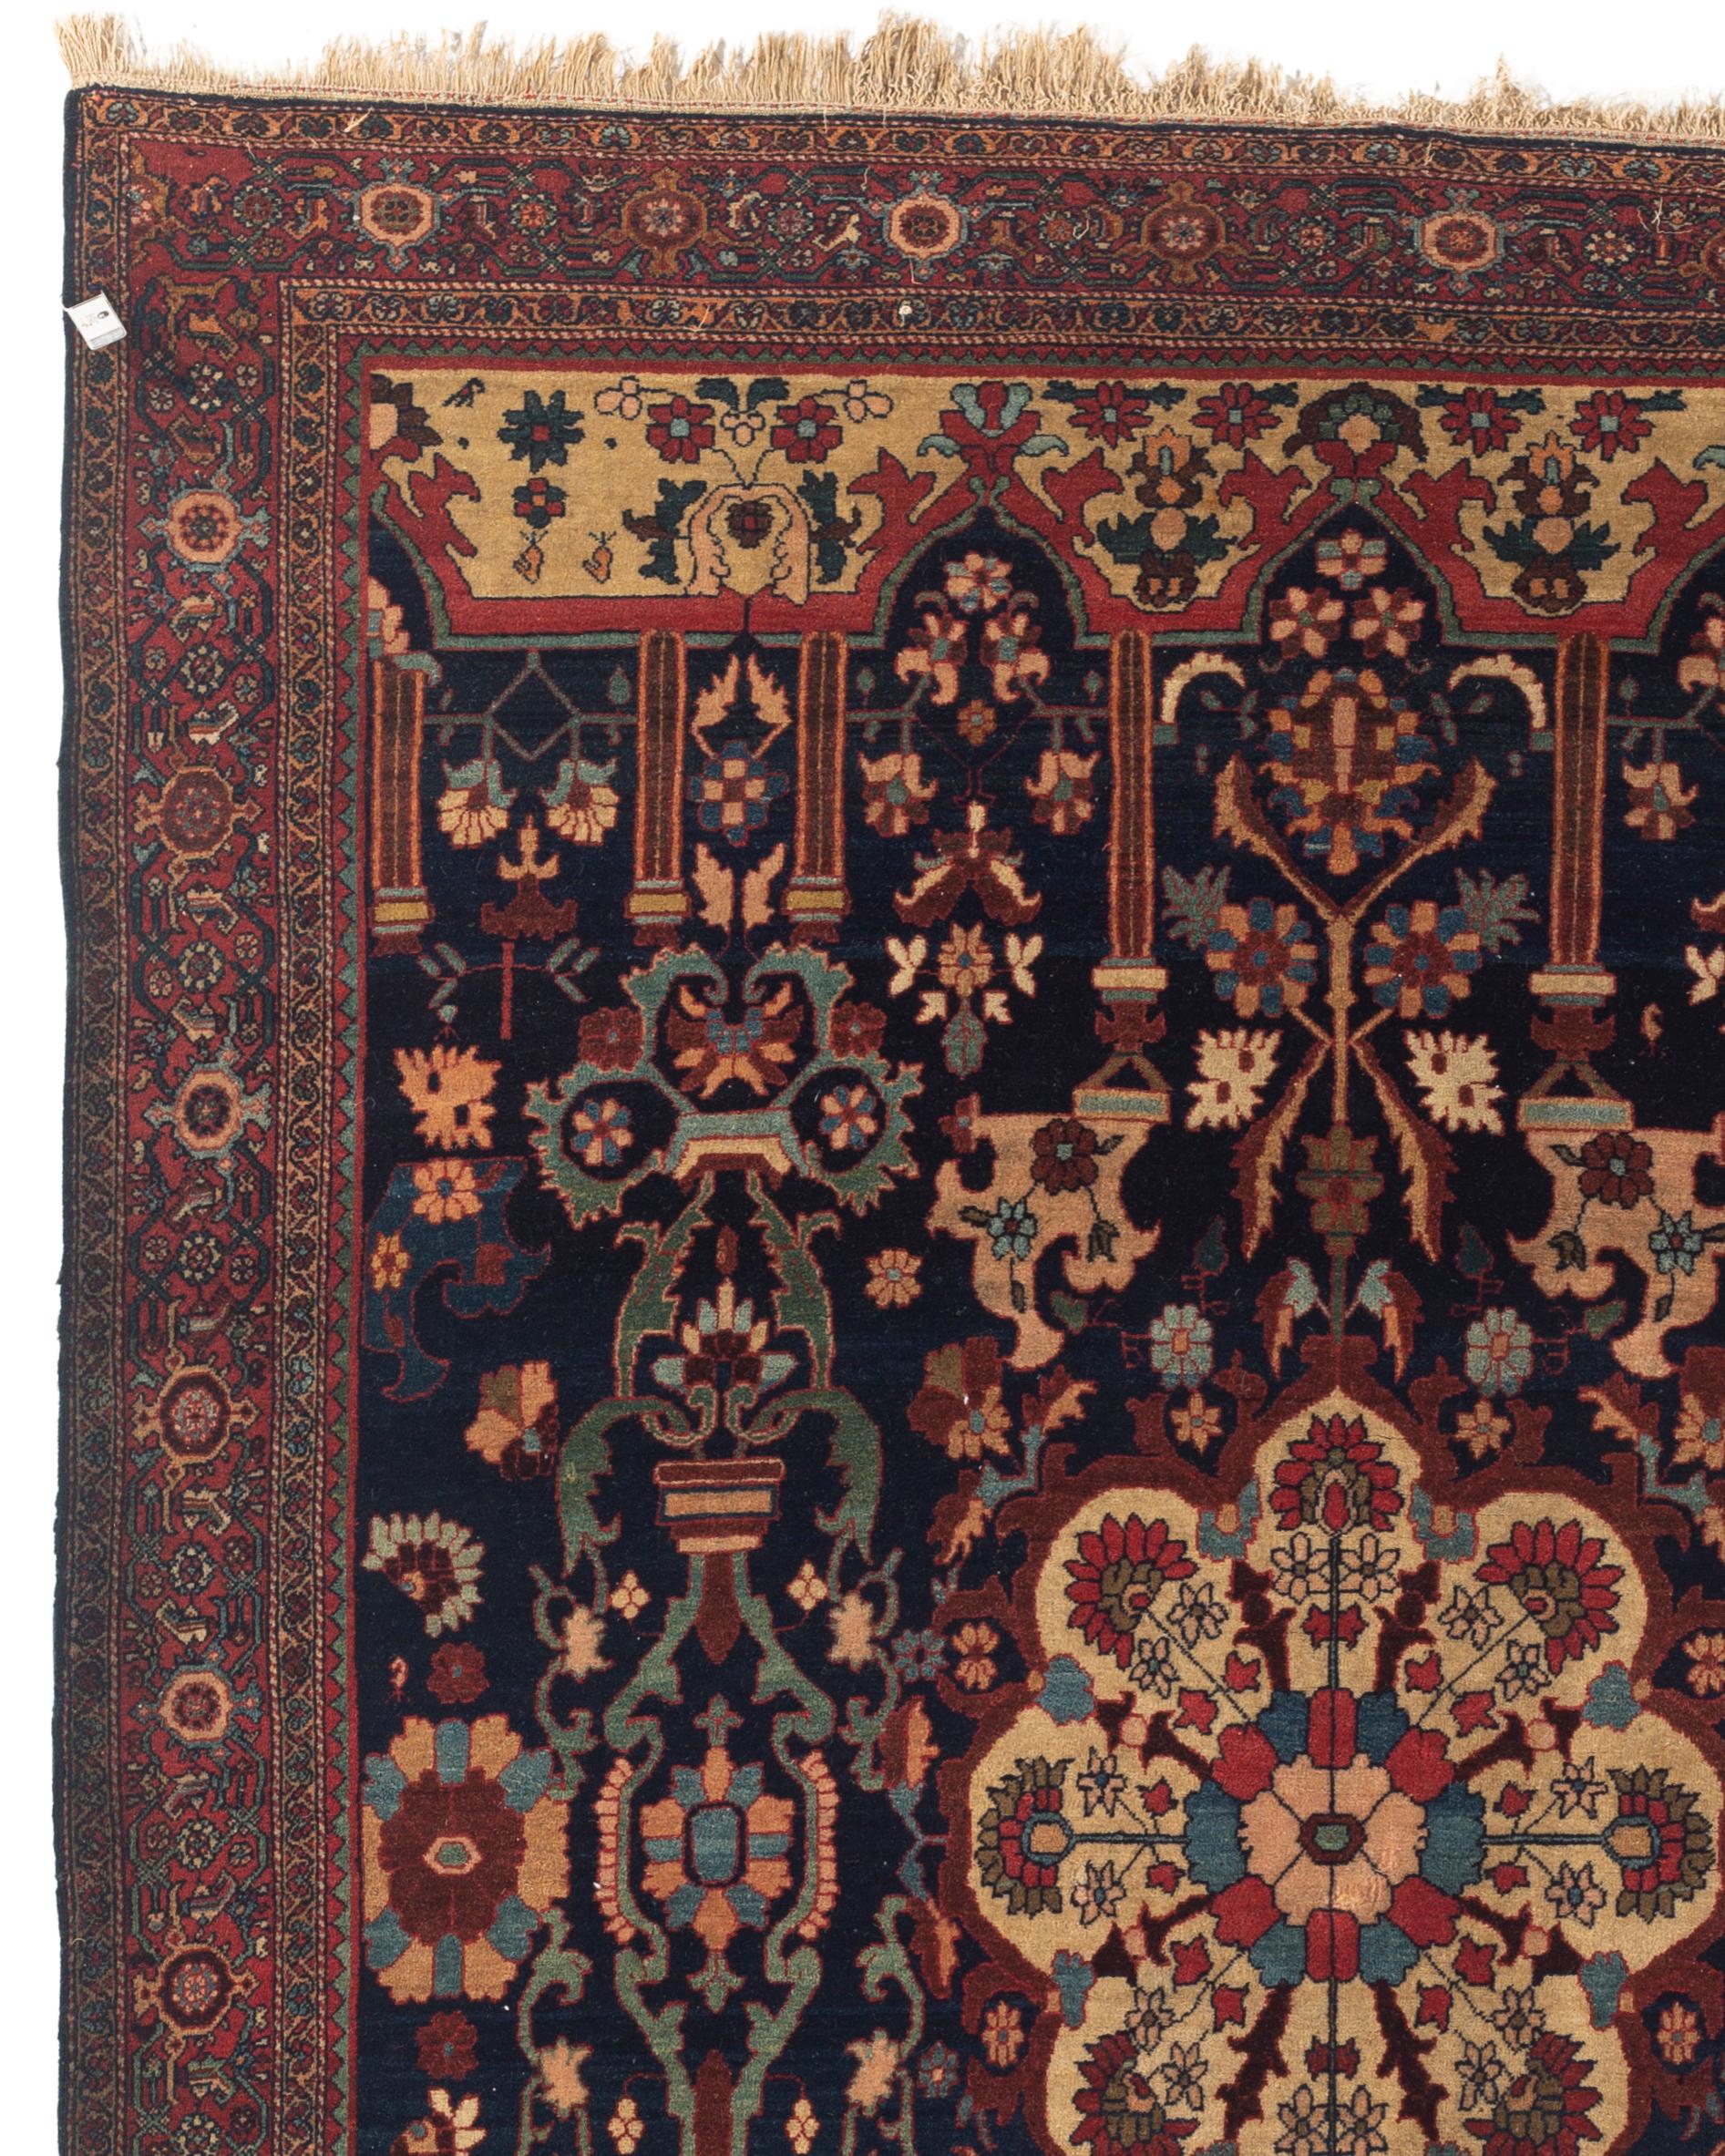 Antique Farahan Sarouk rug, circa 1880. Sarouk rugs come from west central Persia. A deep navy ground with a central ivory medallion woven showing flowers and the ivory design at either end of the rug give an open feel that is aided by the main